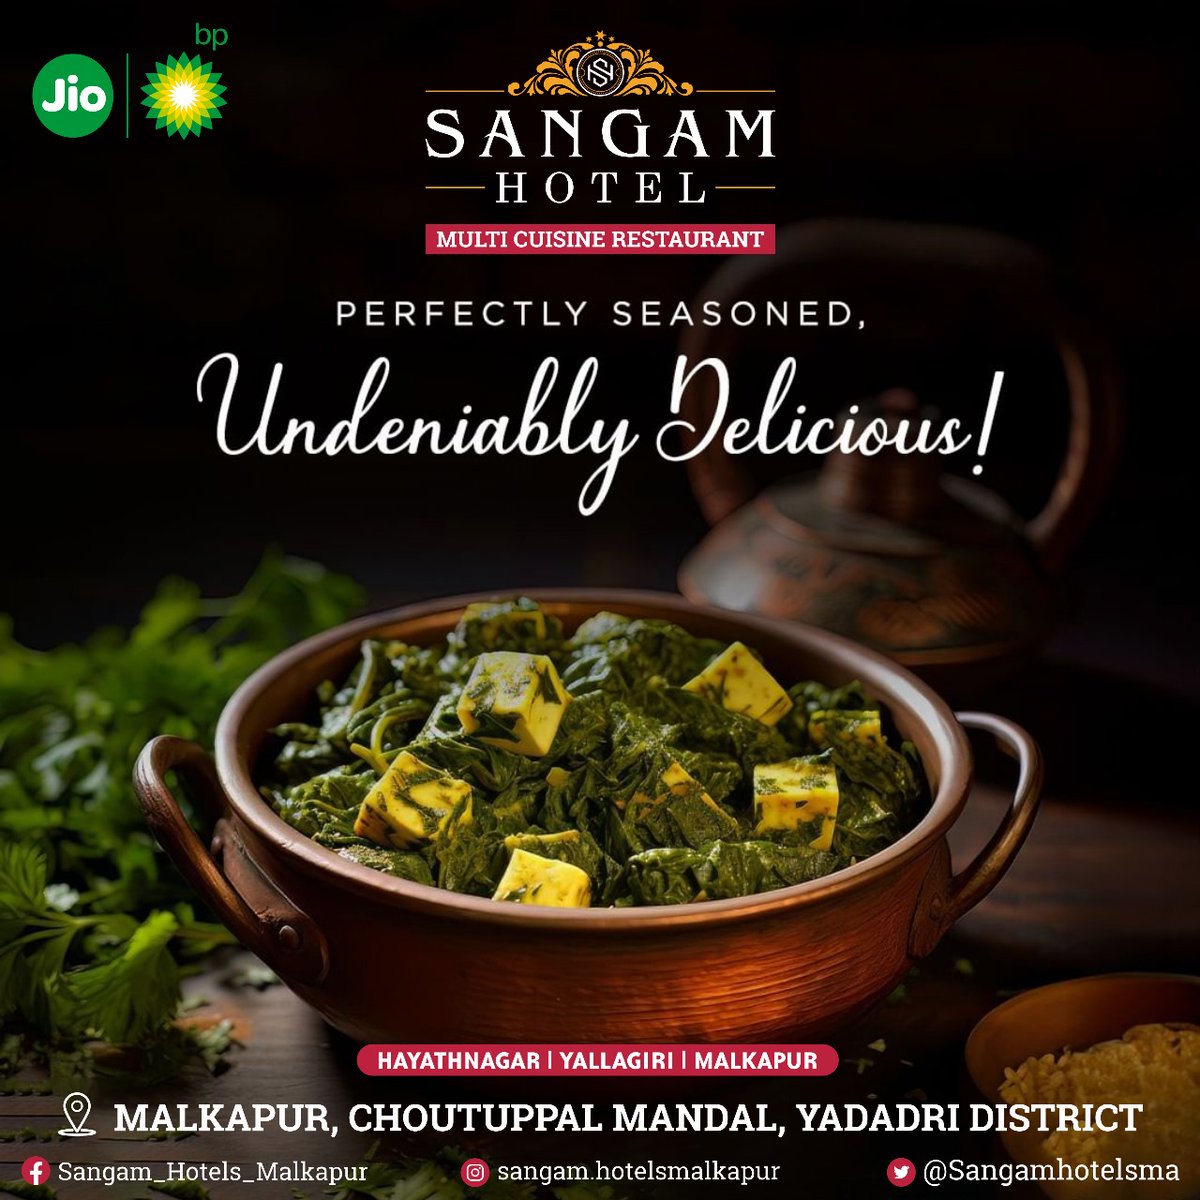 Perfectly seasoned undeniably Delicious! @Sangamhotelsma #paneer #palakpaneer #food #foodie #foodporn #instafood #lunch #healthyfood #yummy #foodphotography #delicious #brunch #dinner #coffee #foodblogger #foodstagram #homemade #instagood #healthy